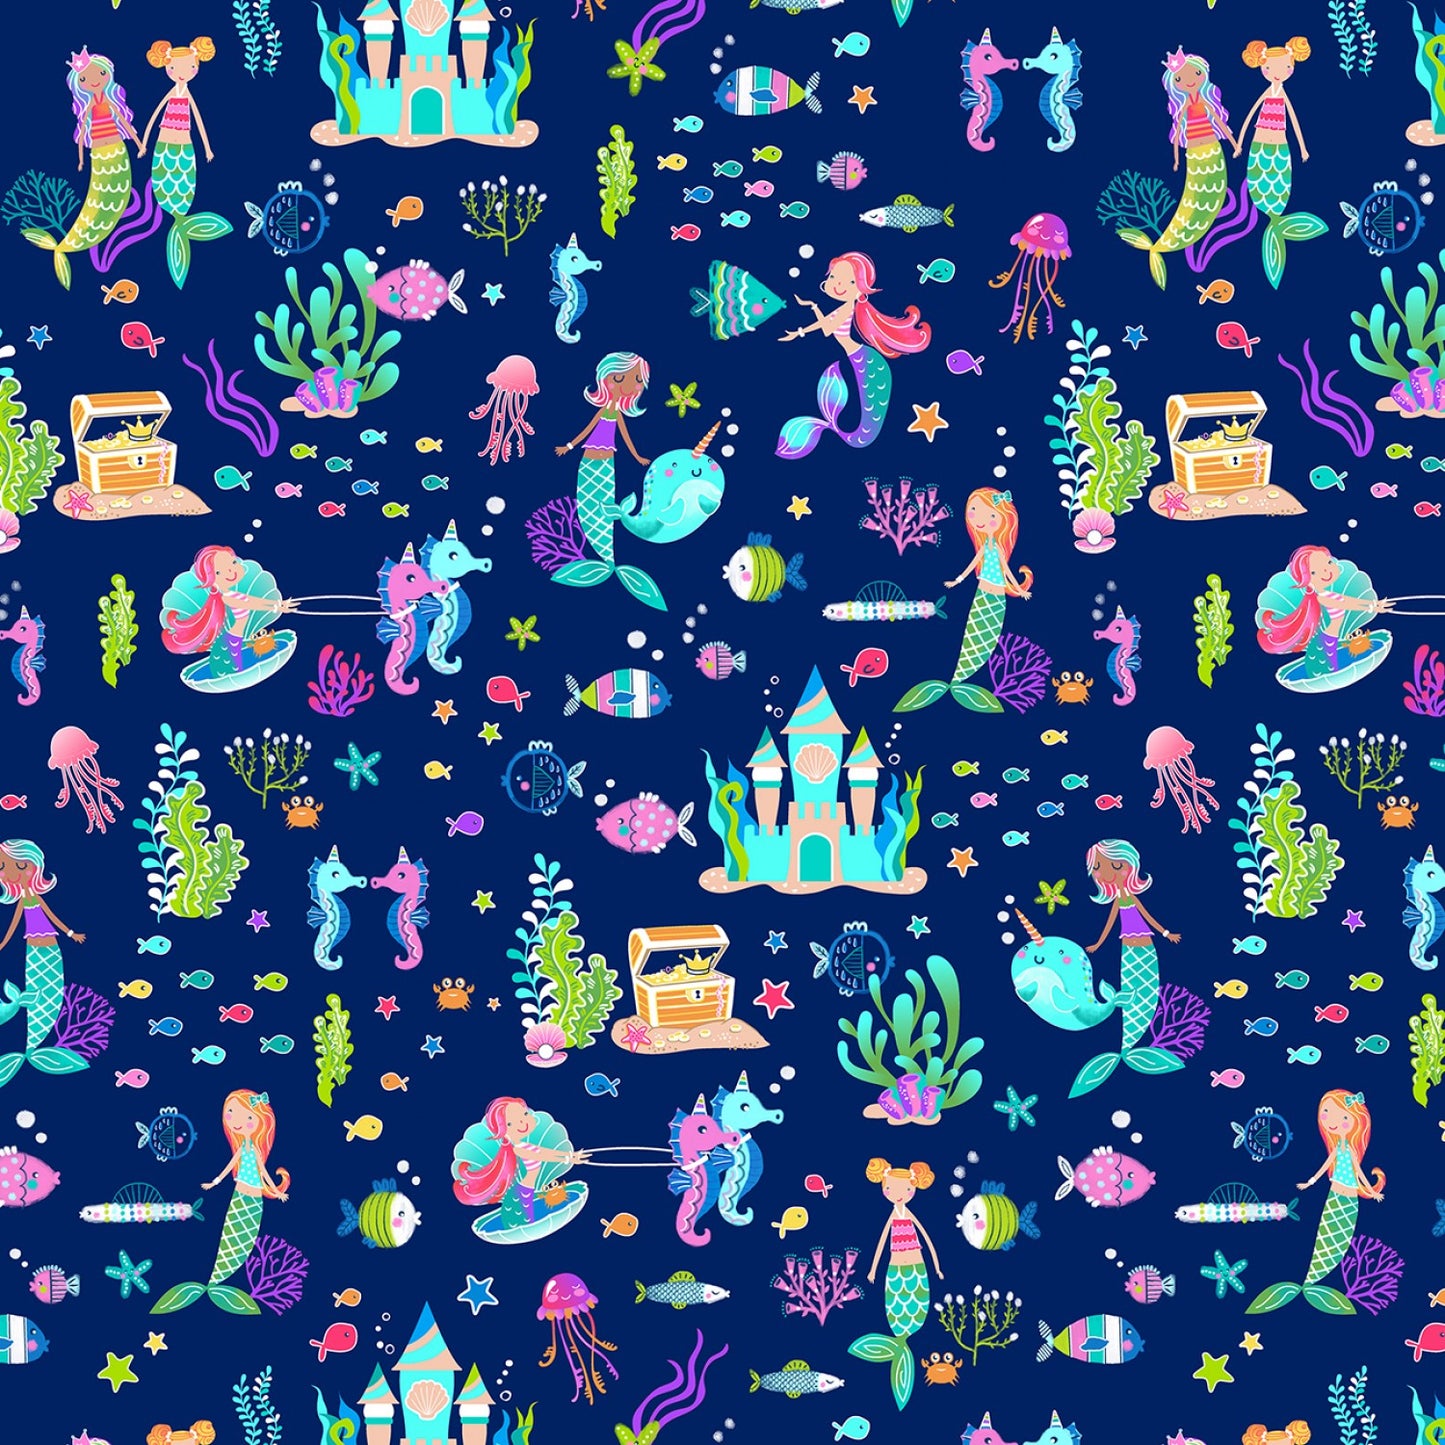 Mystical Mermaids Mermaid Party Pearlized Navy    12520PB-56 Cotton Woven Fabric